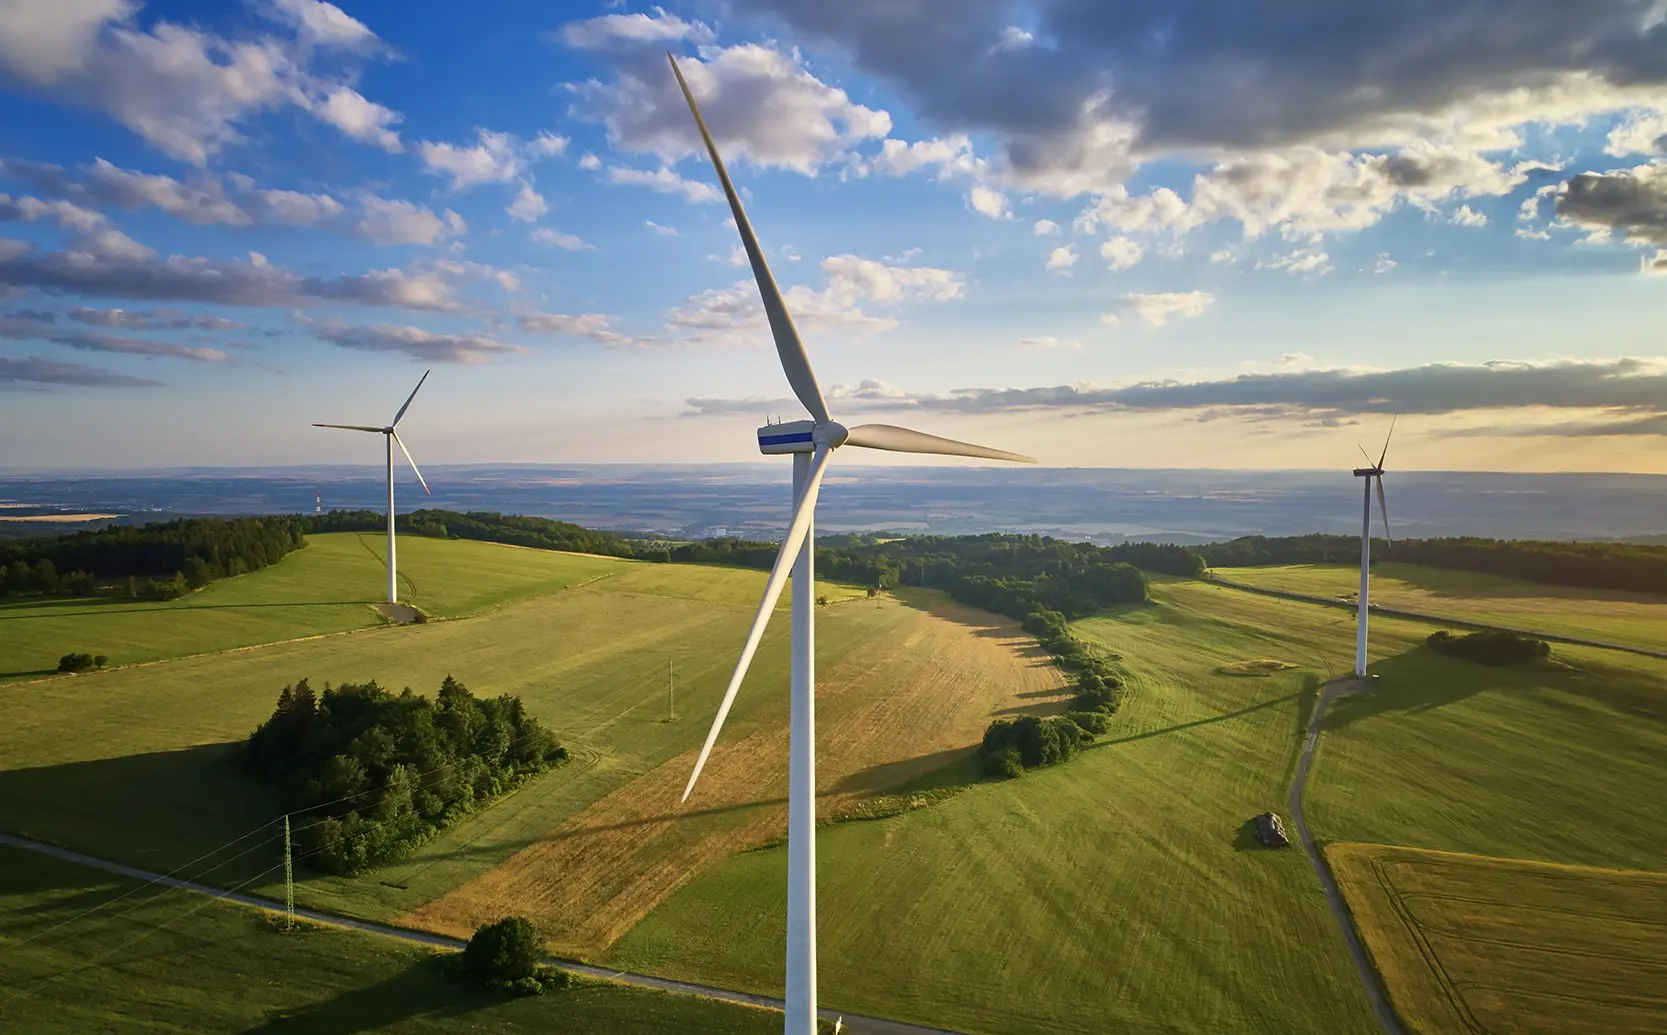 Aerial view of wind turbines at a wind farm where Apex Companies provided renewable energy services